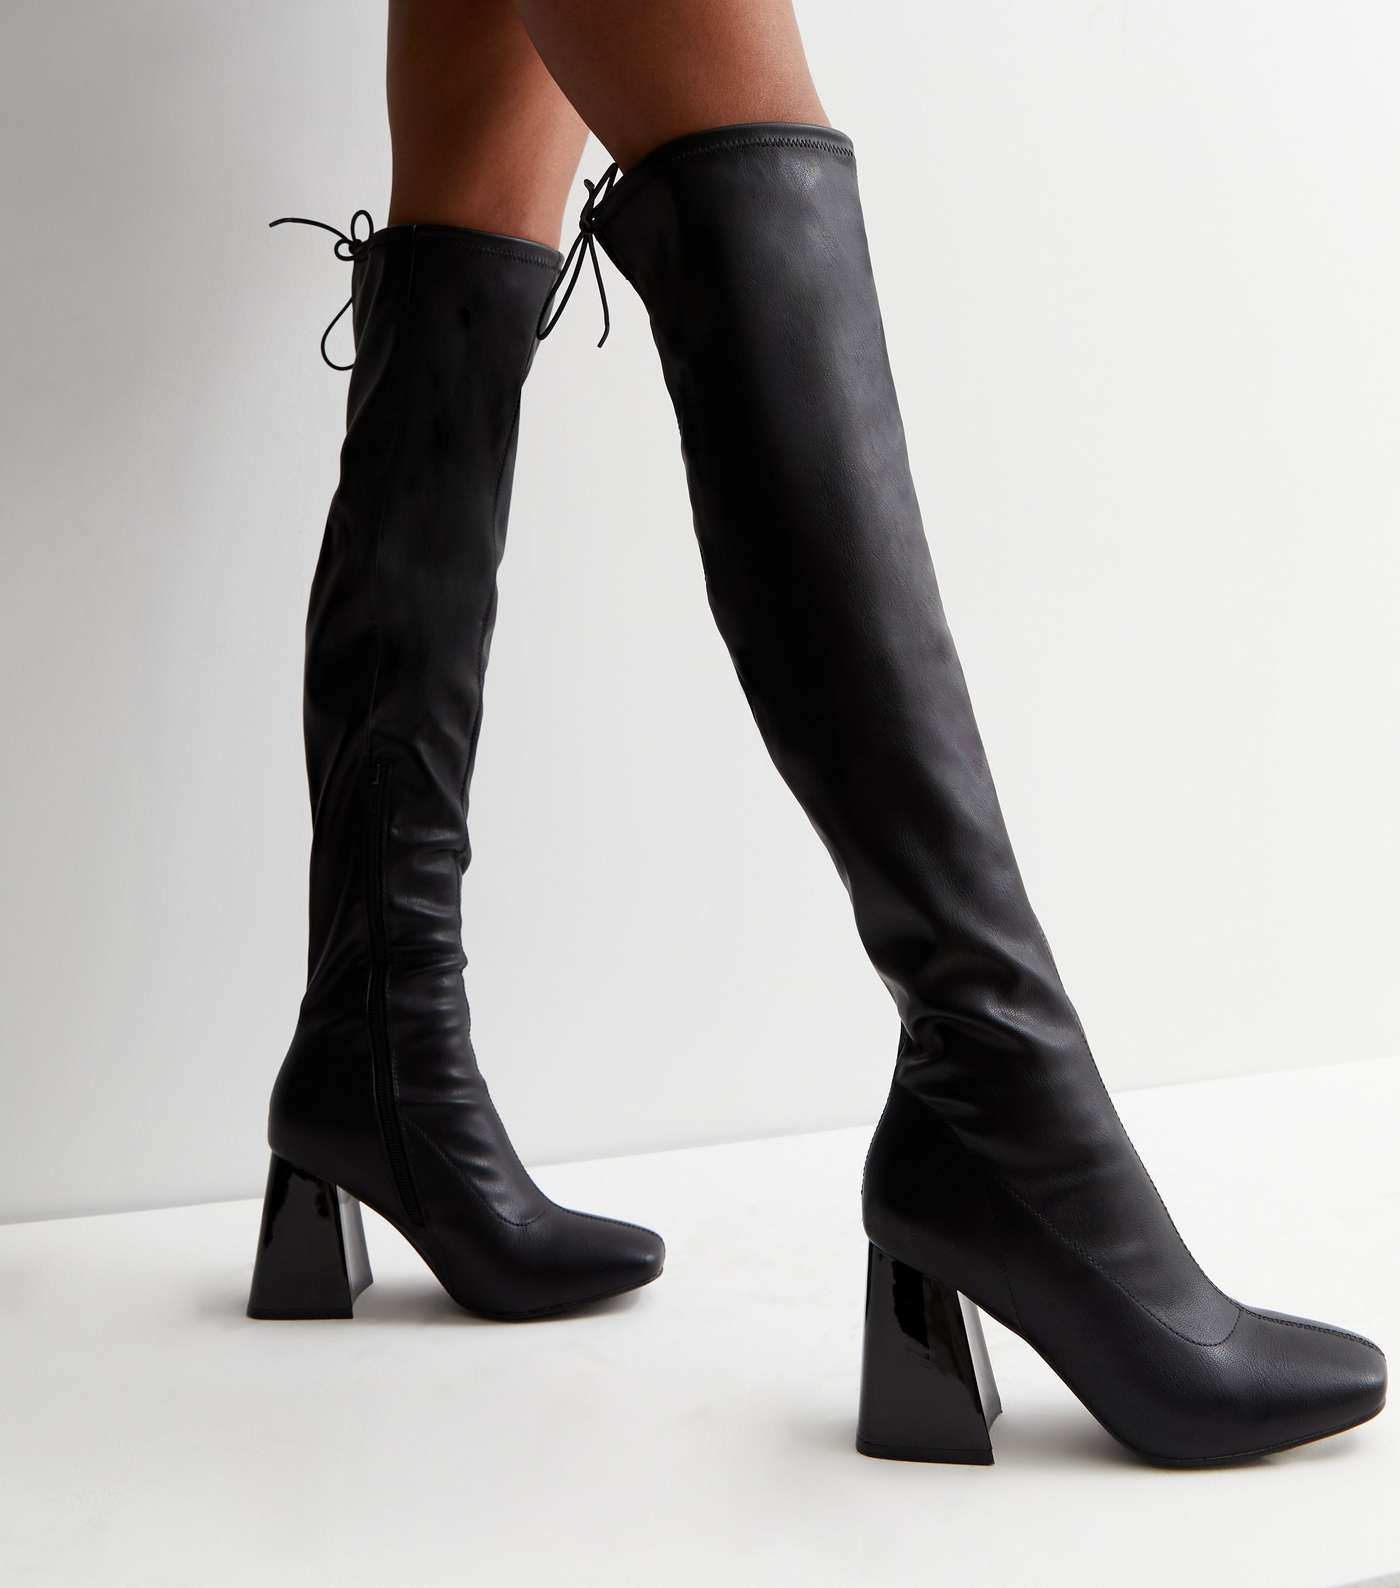 Black Over the Knee Flared Block Heel Stretch Boots Image 2